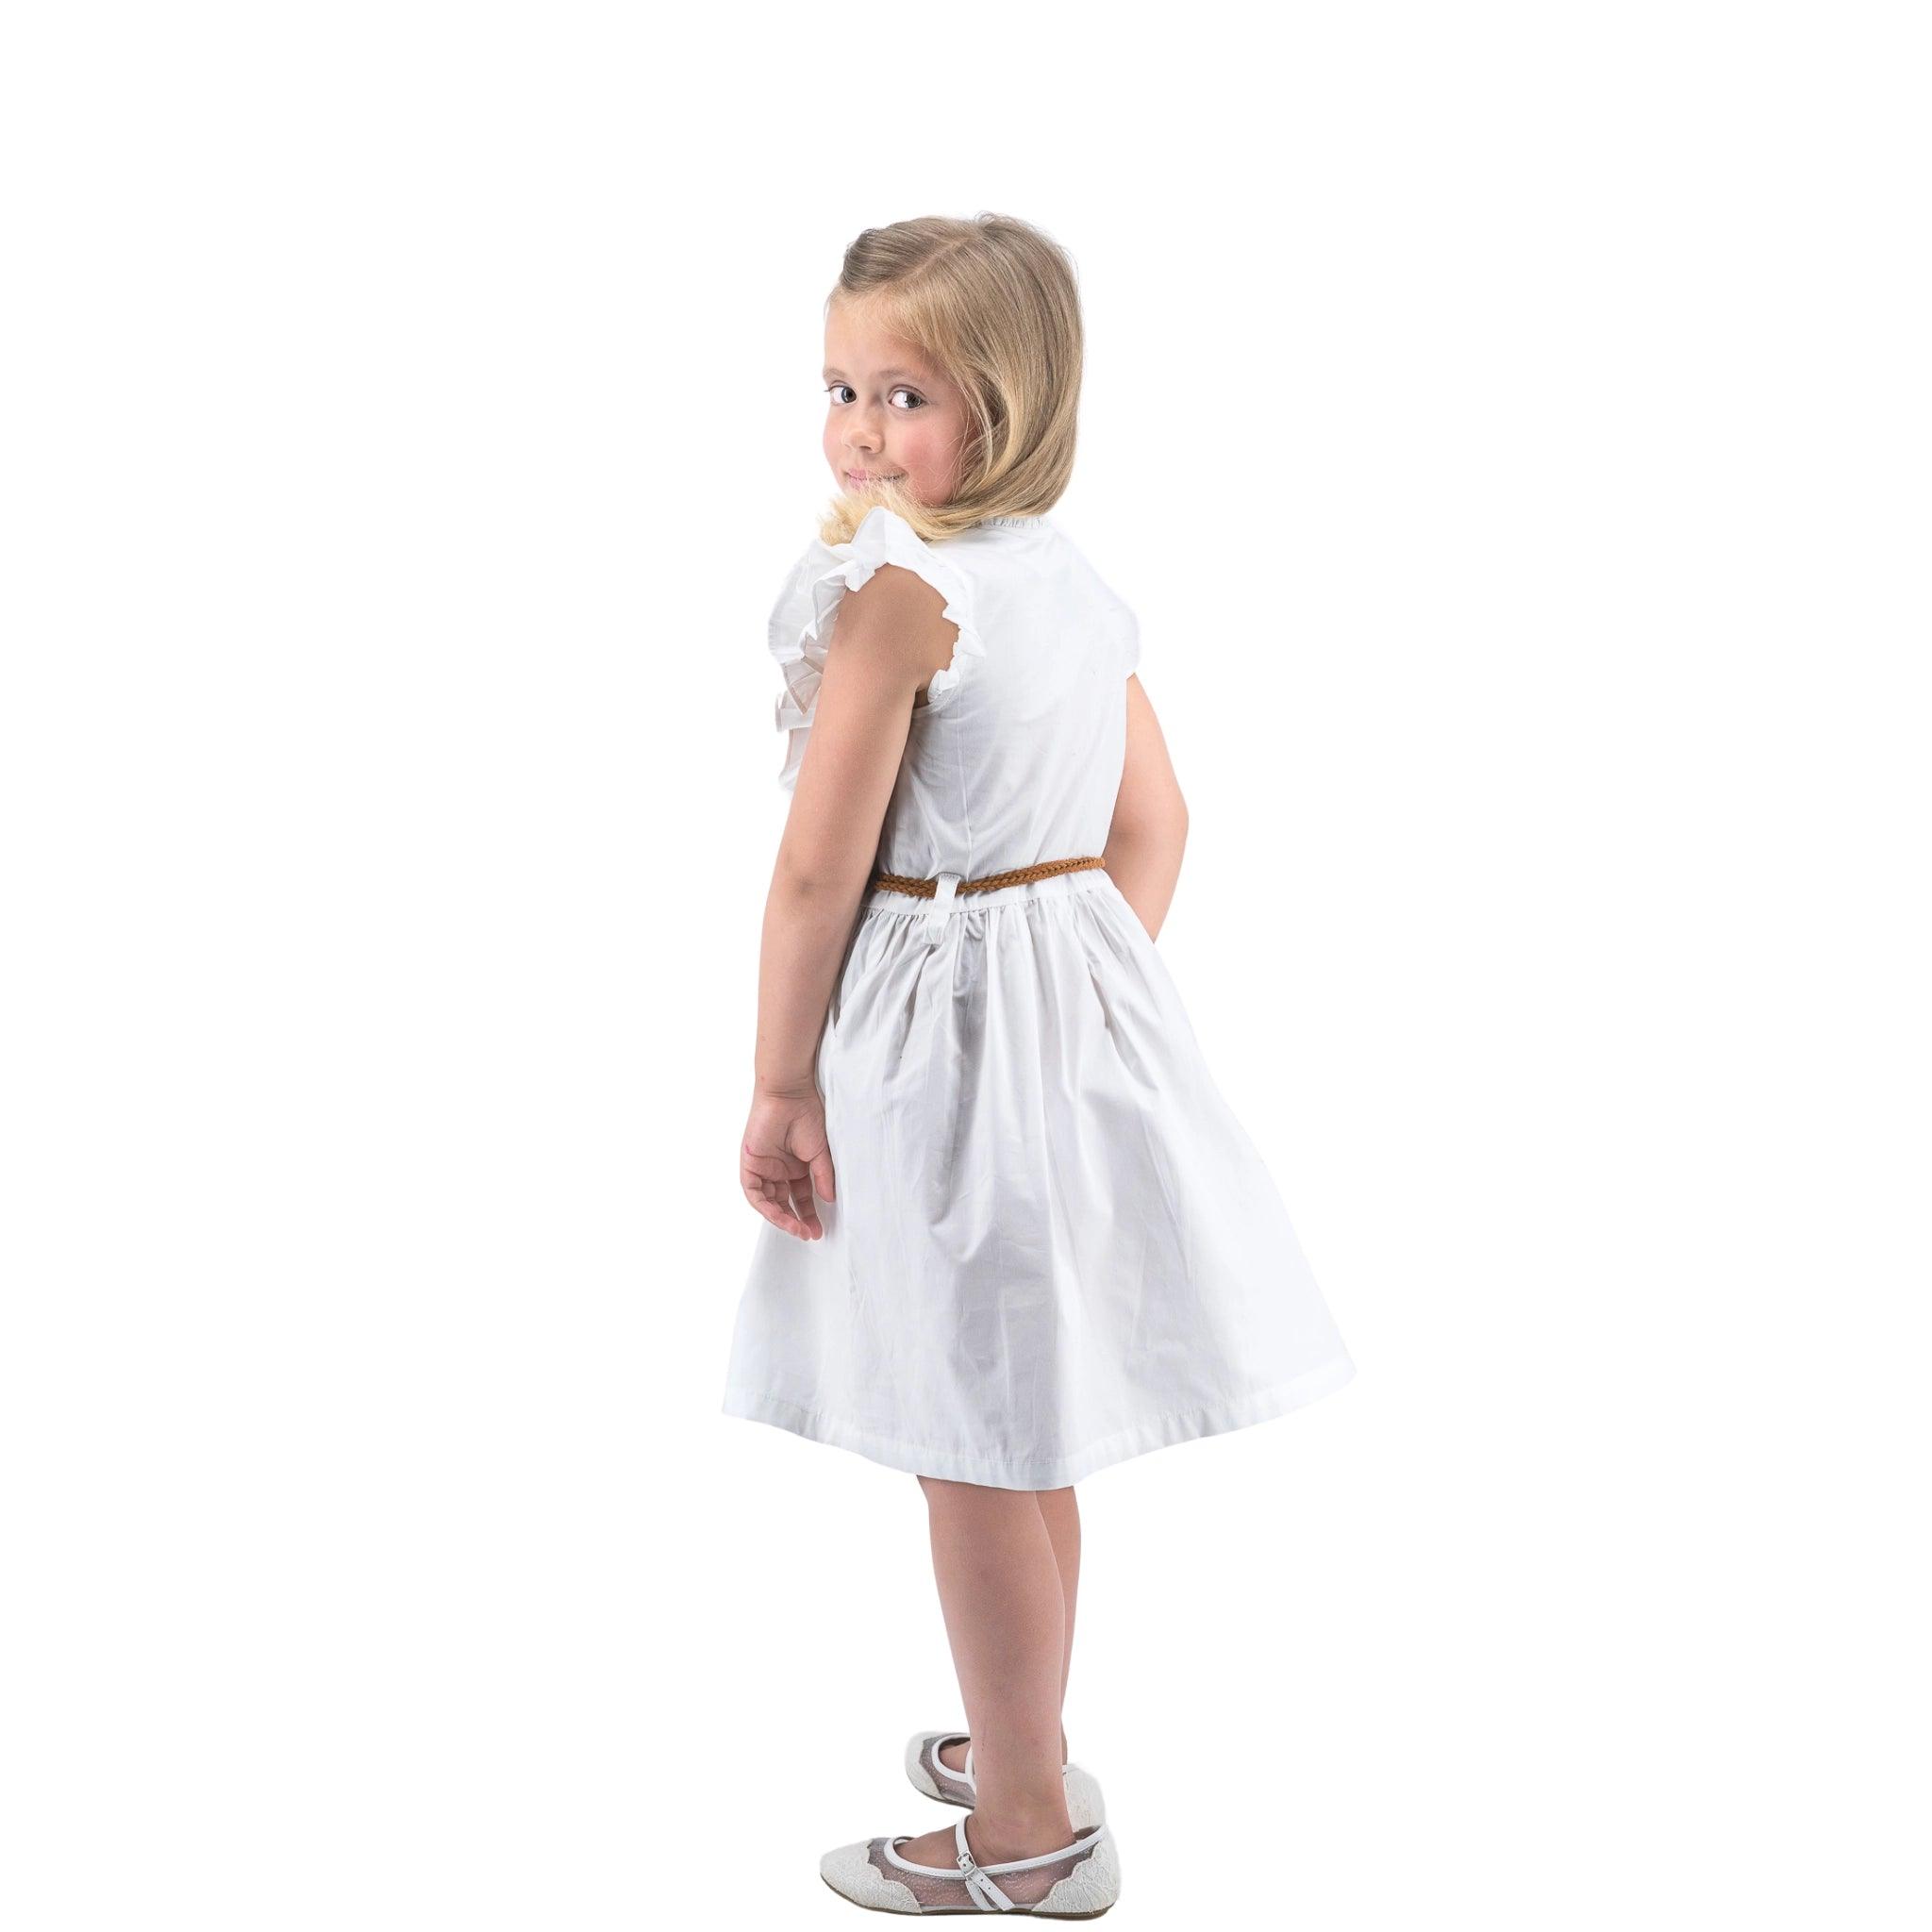 Young girl in a Karee Butterfly Sleeve Cotton Dress in White, looking over her shoulder, standing against a white background.